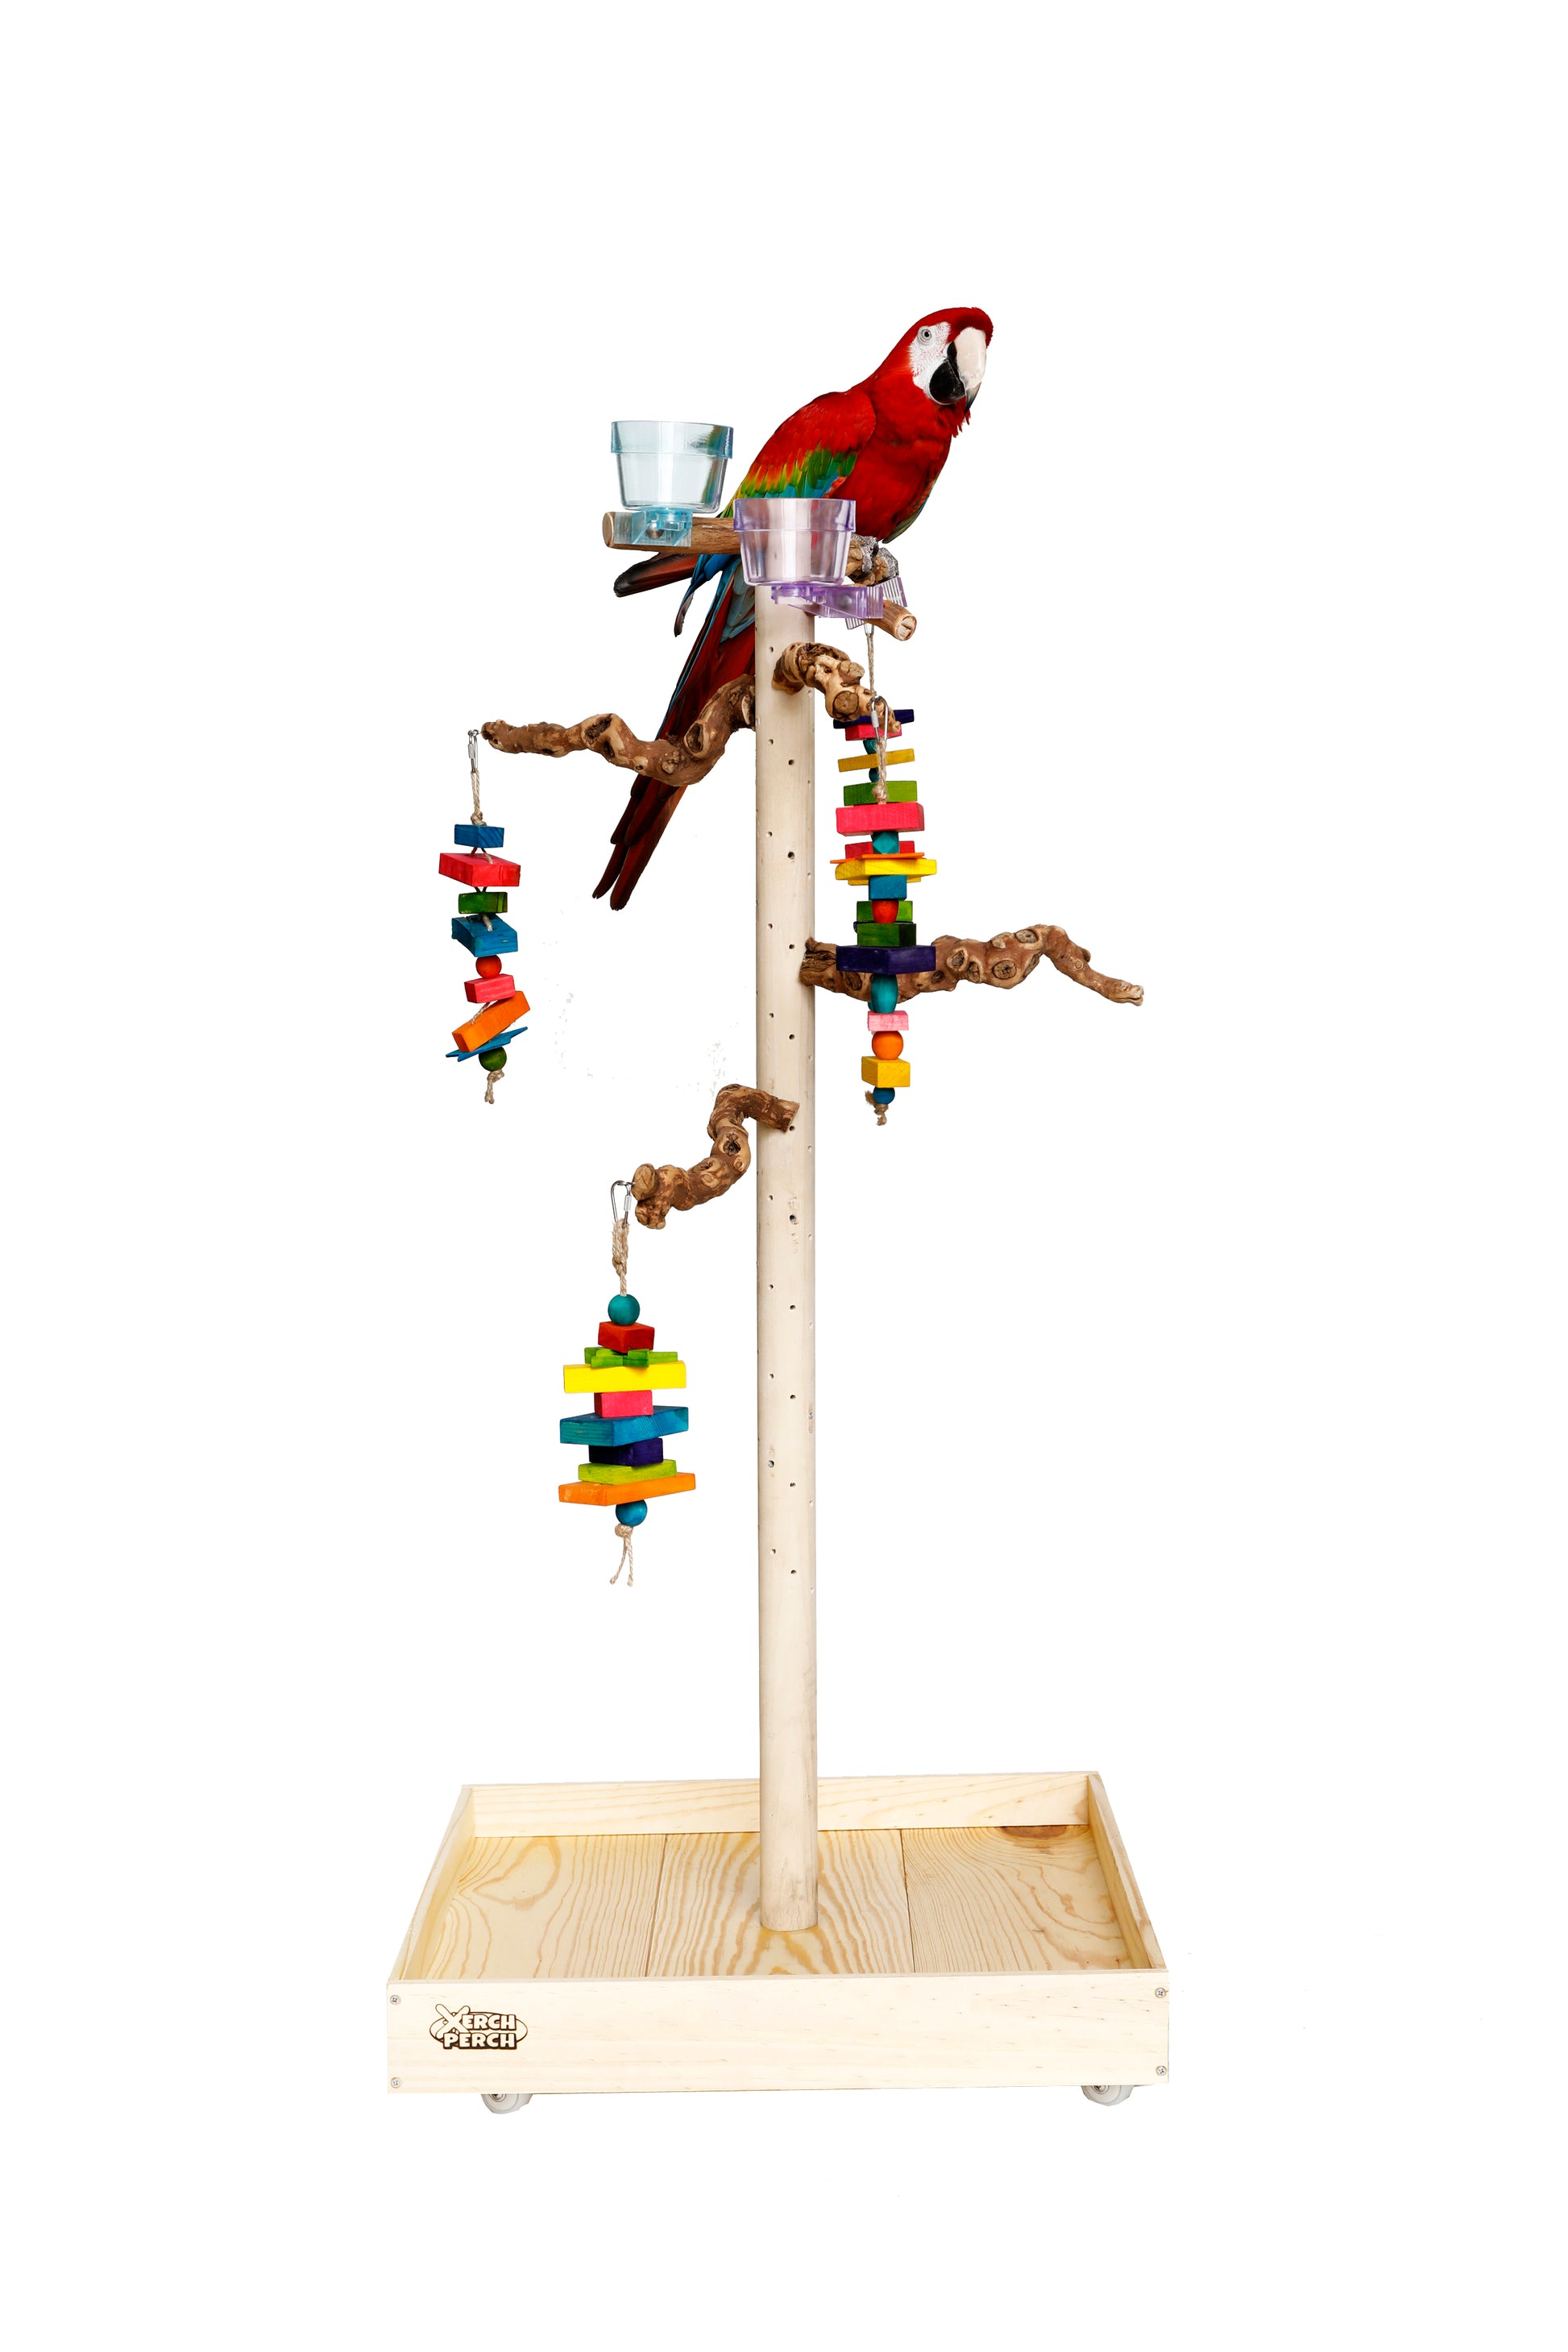 Natural DragonWood Parrot Stand Perch - Extra Tall – The Parrot Mom, LLC